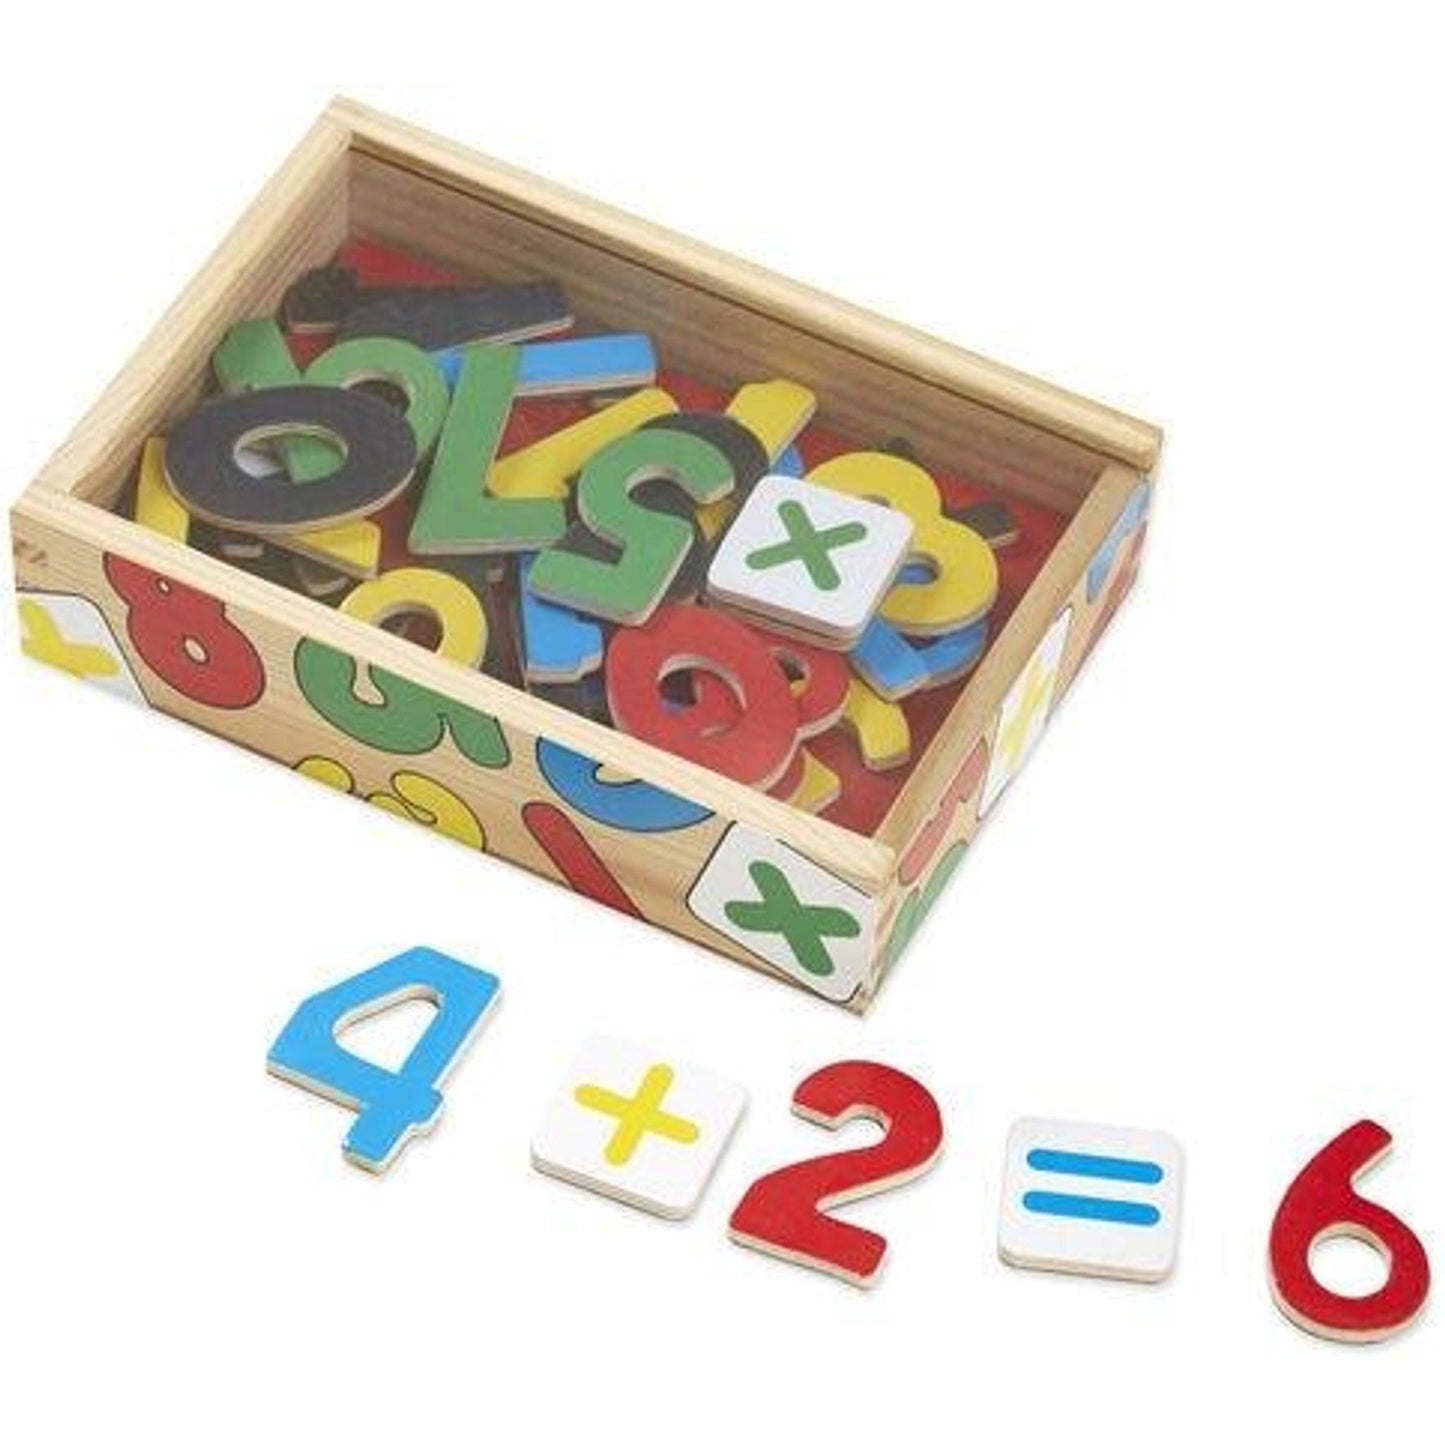 Number Magnets - 37 Piece - Toybox Tales